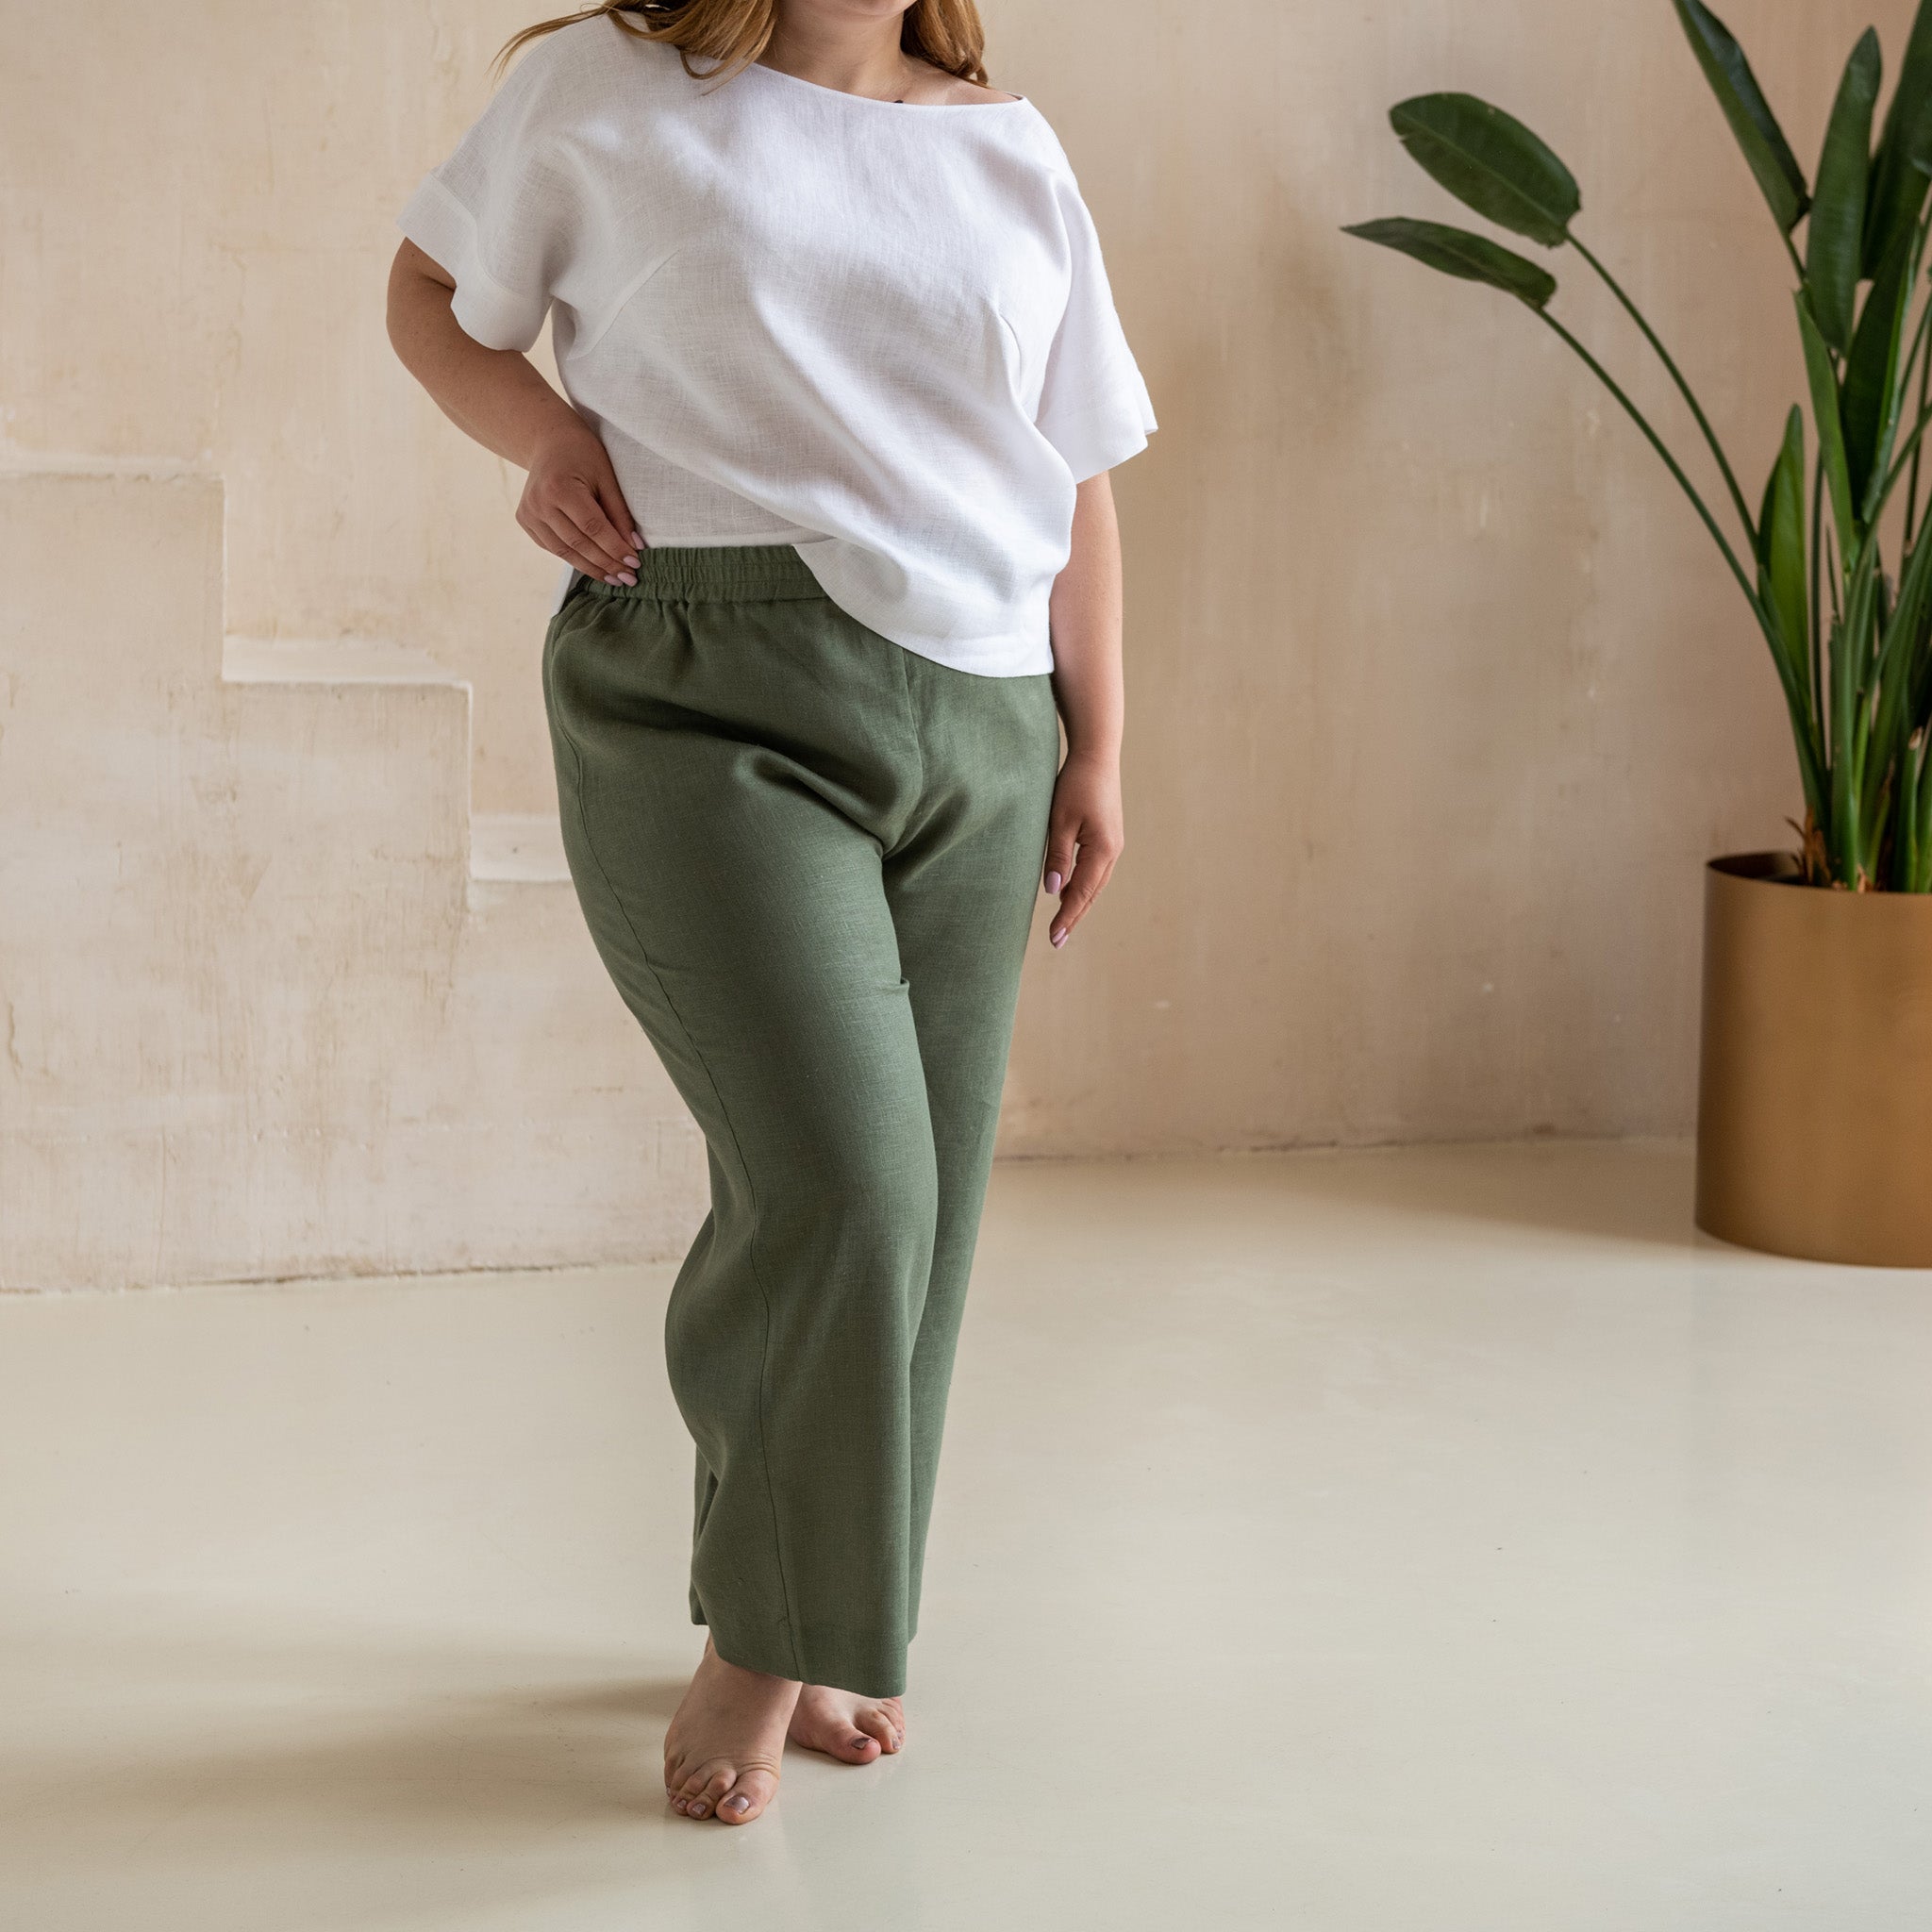 6 plus-size work pants that'll have you ready for the office in a jiffy